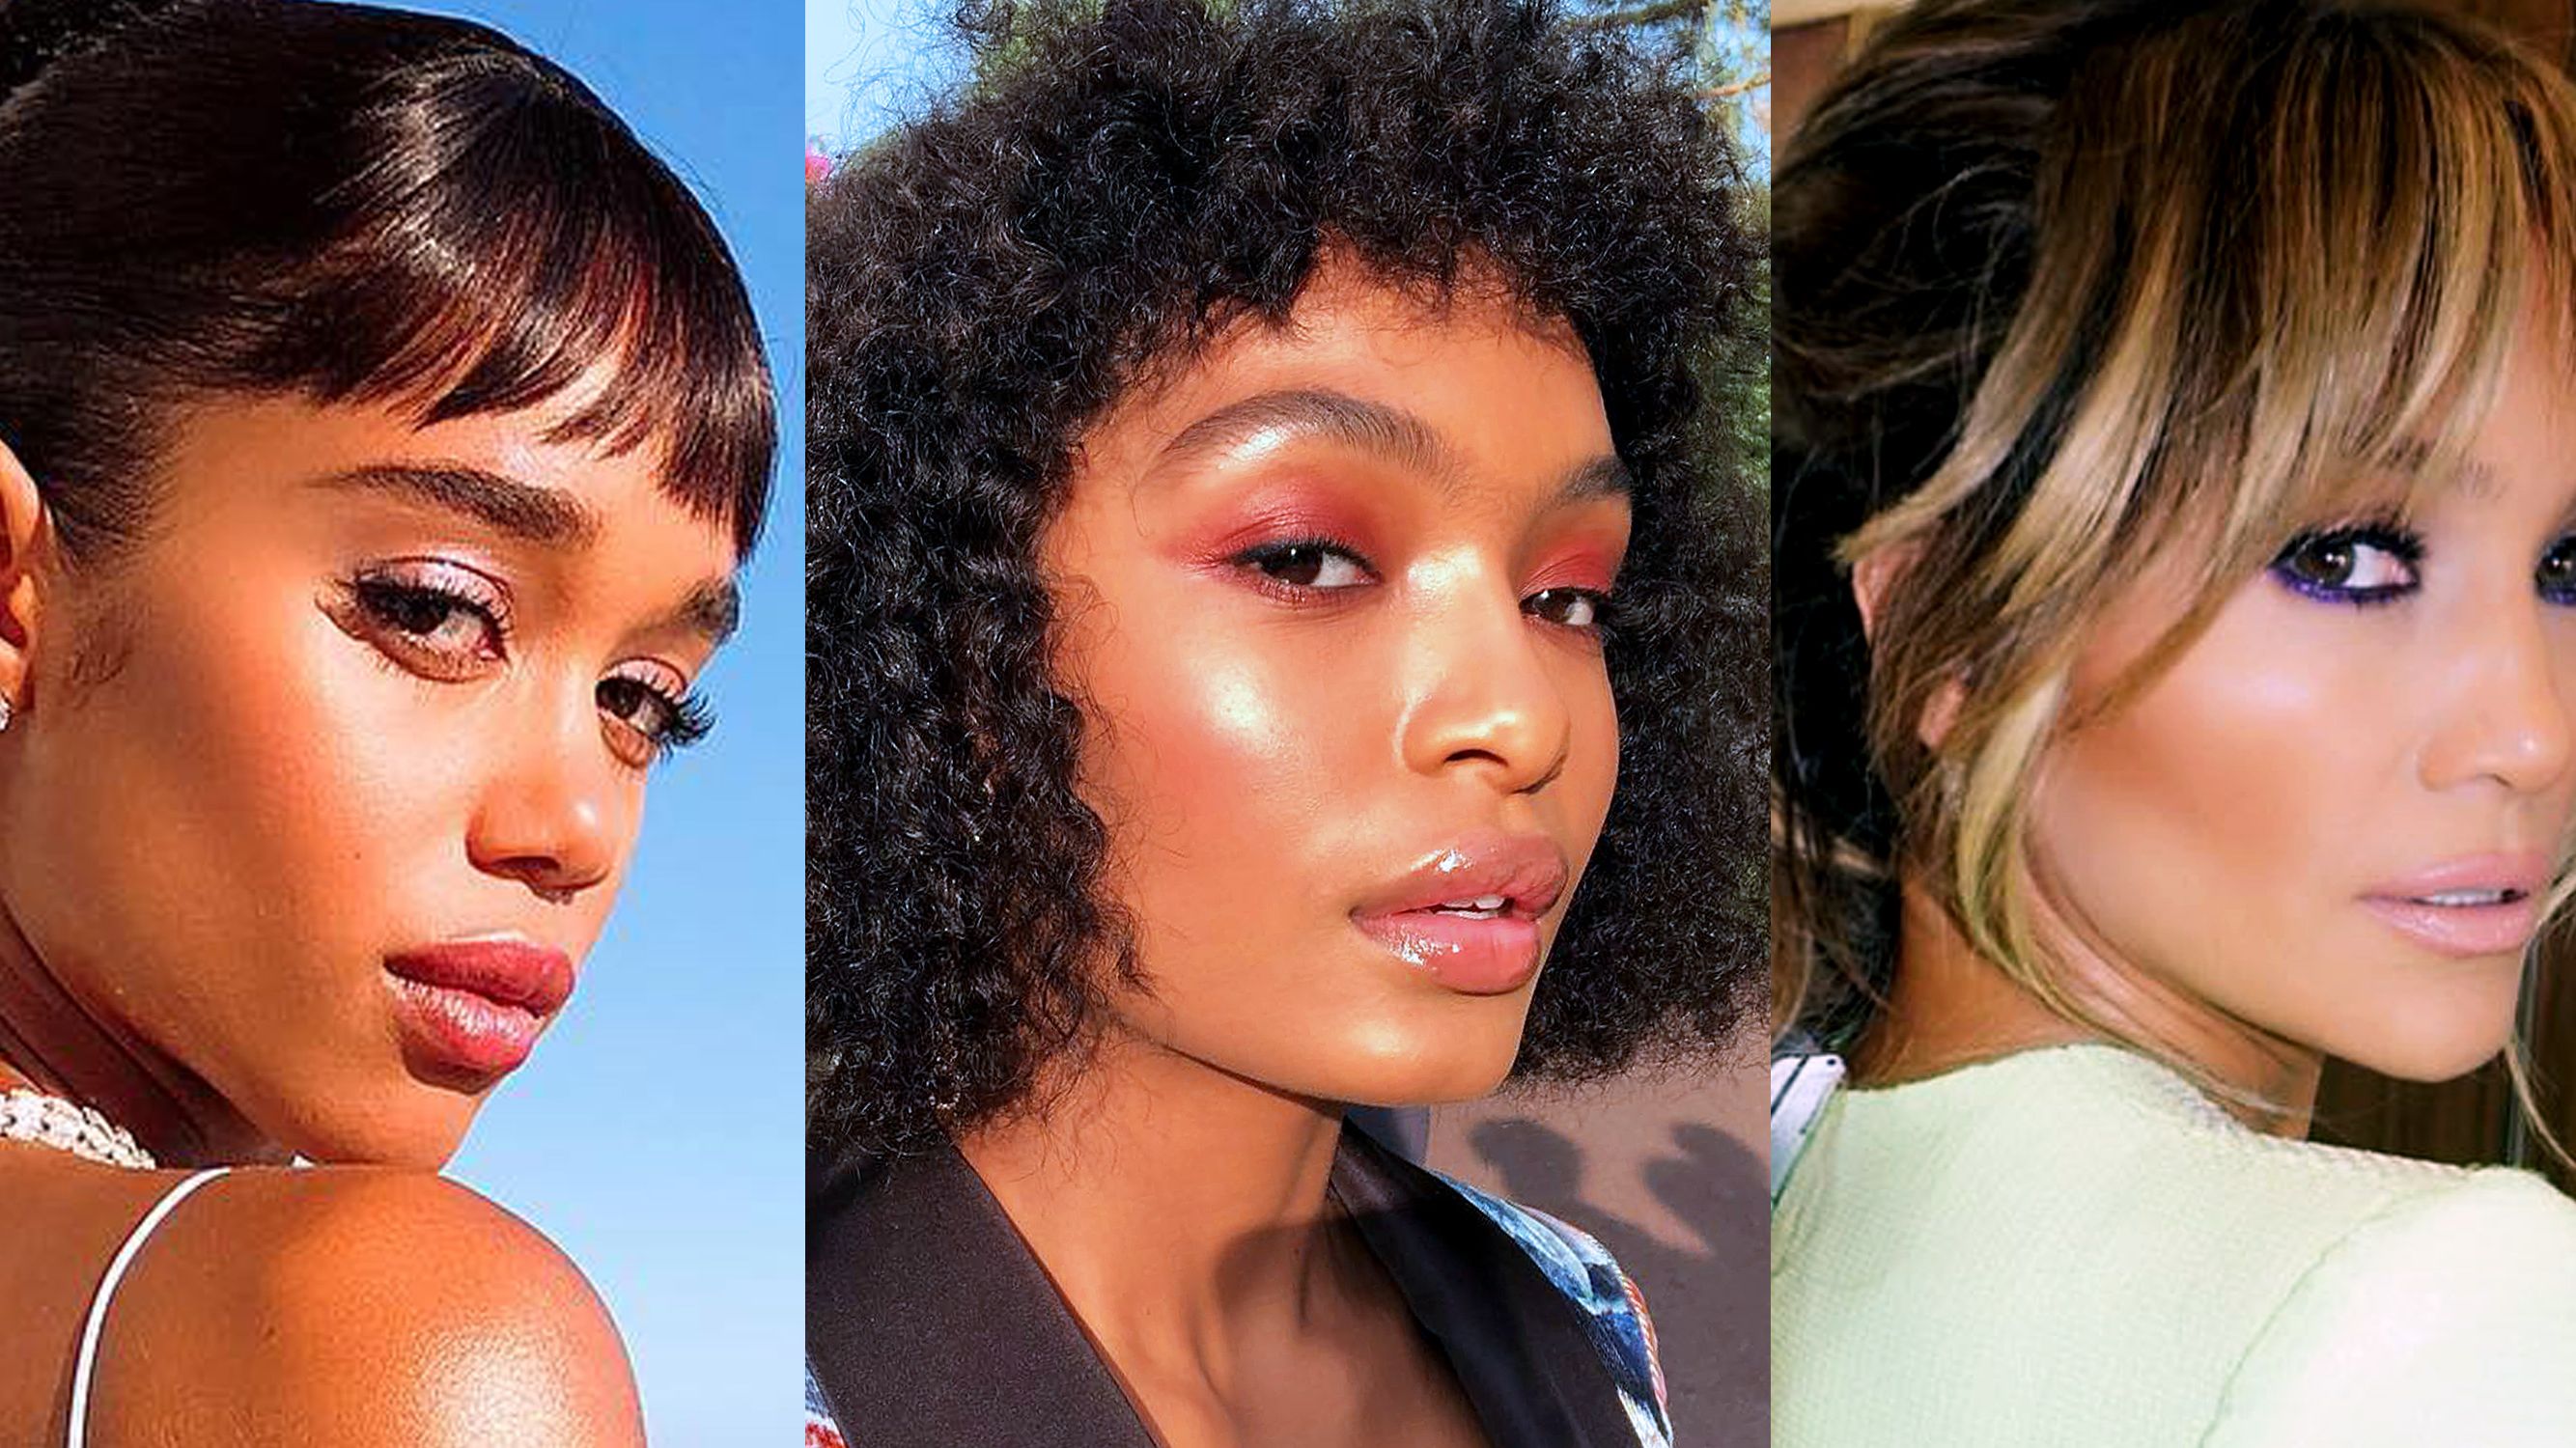 The Best Bangs Short Hair, Thick Curly Hair, and Medium According to Stylists | Marie Claire